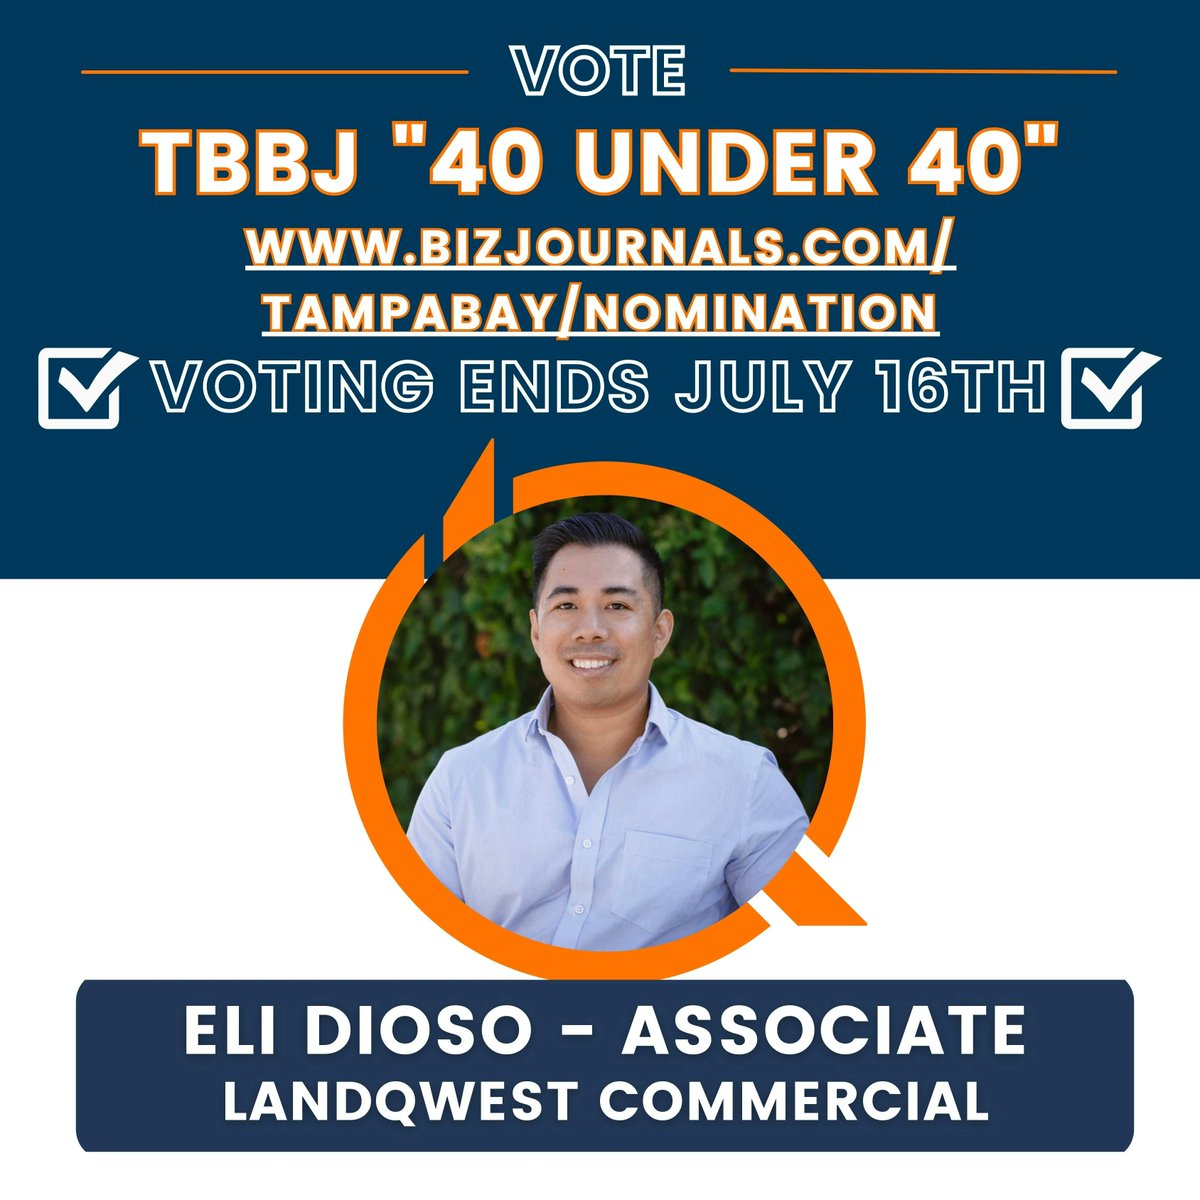 📢#Tampa #CREFam Assemble! 🛡️ 

Support our #Tampa Associate, Eli Dioso, for the #TBBJ 40 under 40 Award! 

In only 4 years, Eli’s #retail and #restaurant #tenantrep expertise spread across the #CRE scene. :muscle: 

Click this link to vote!:  buff.ly/3MqkGzK.